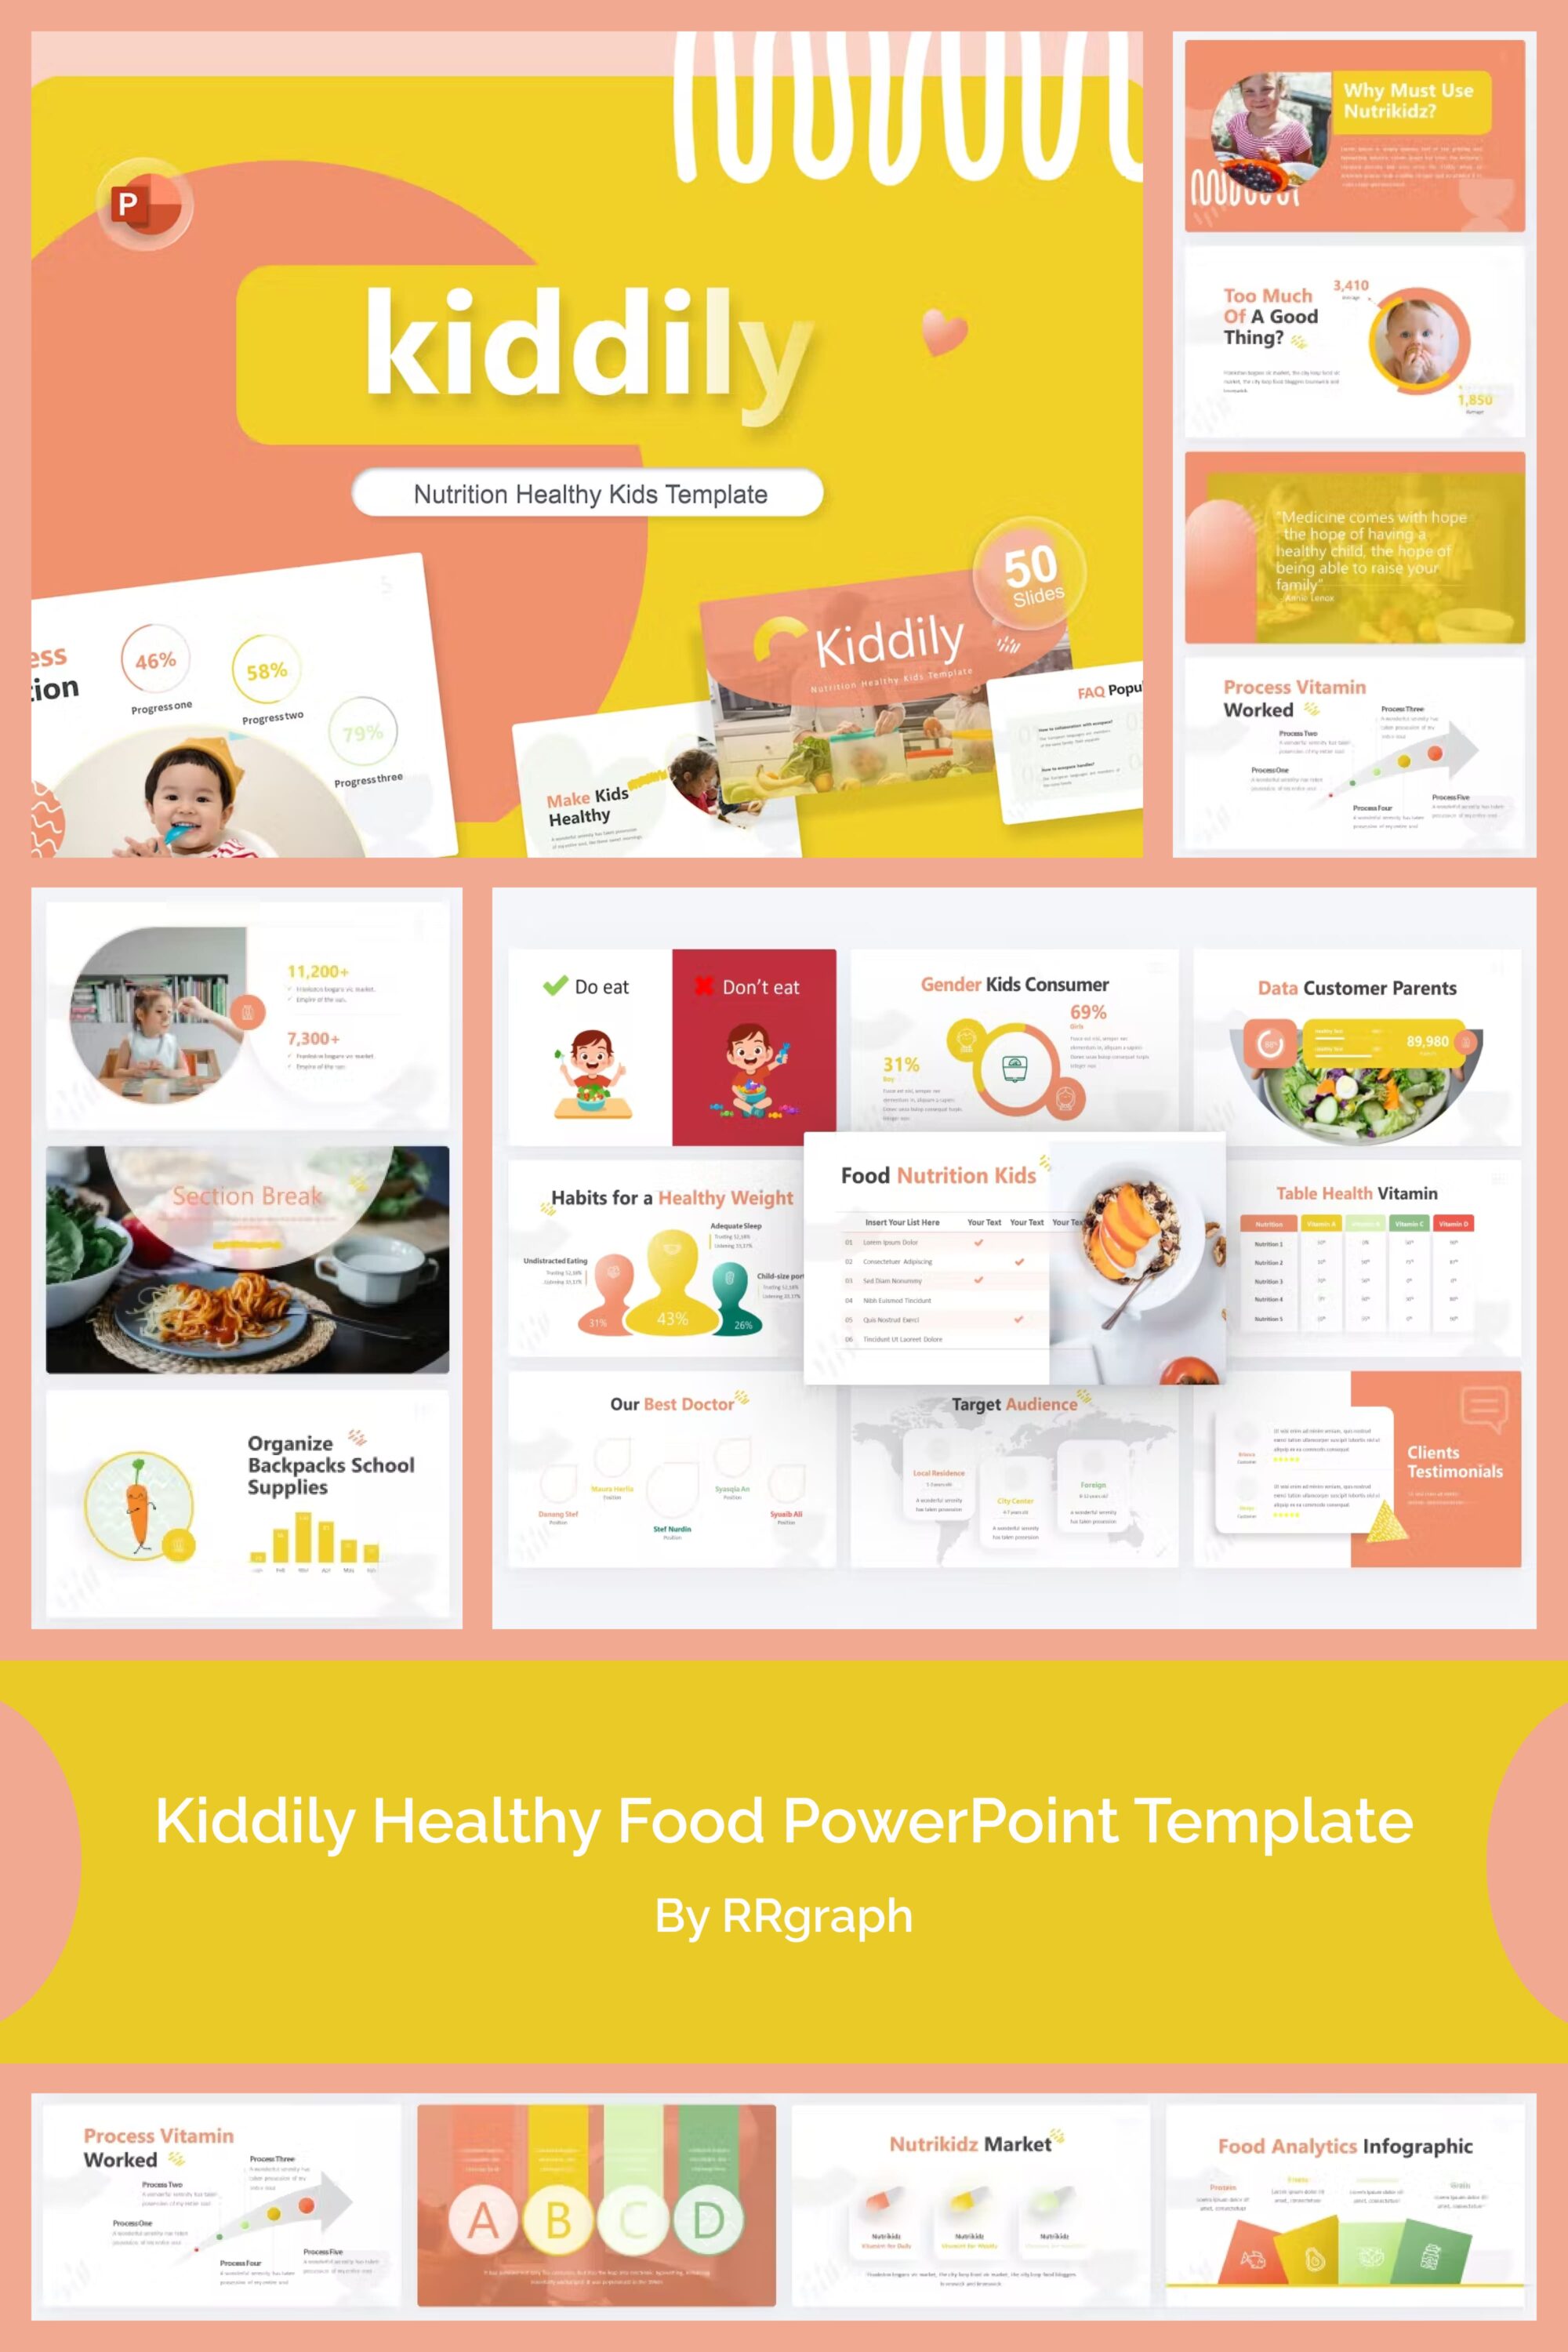 Kiddily Healthy Food PowerPoint Template - pinterest image preview.